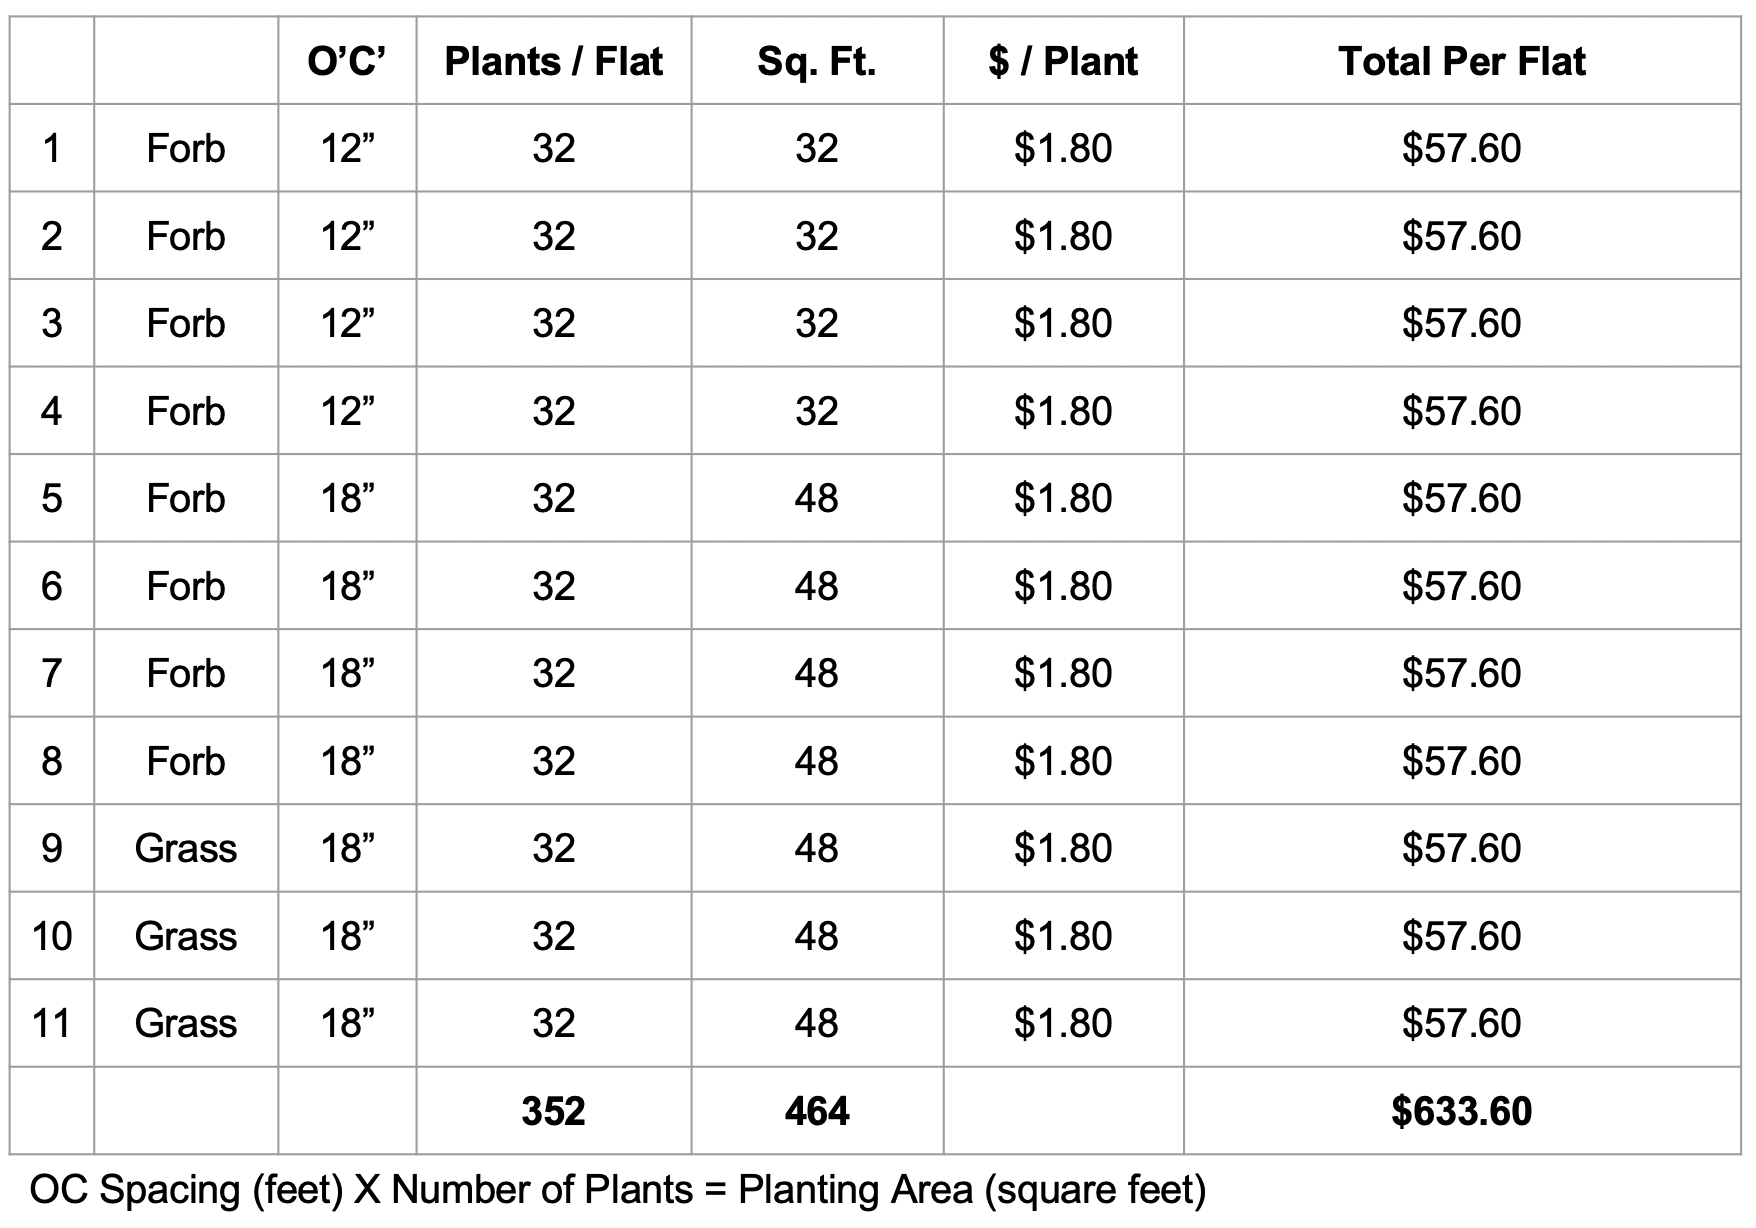 table-of-plant-costs